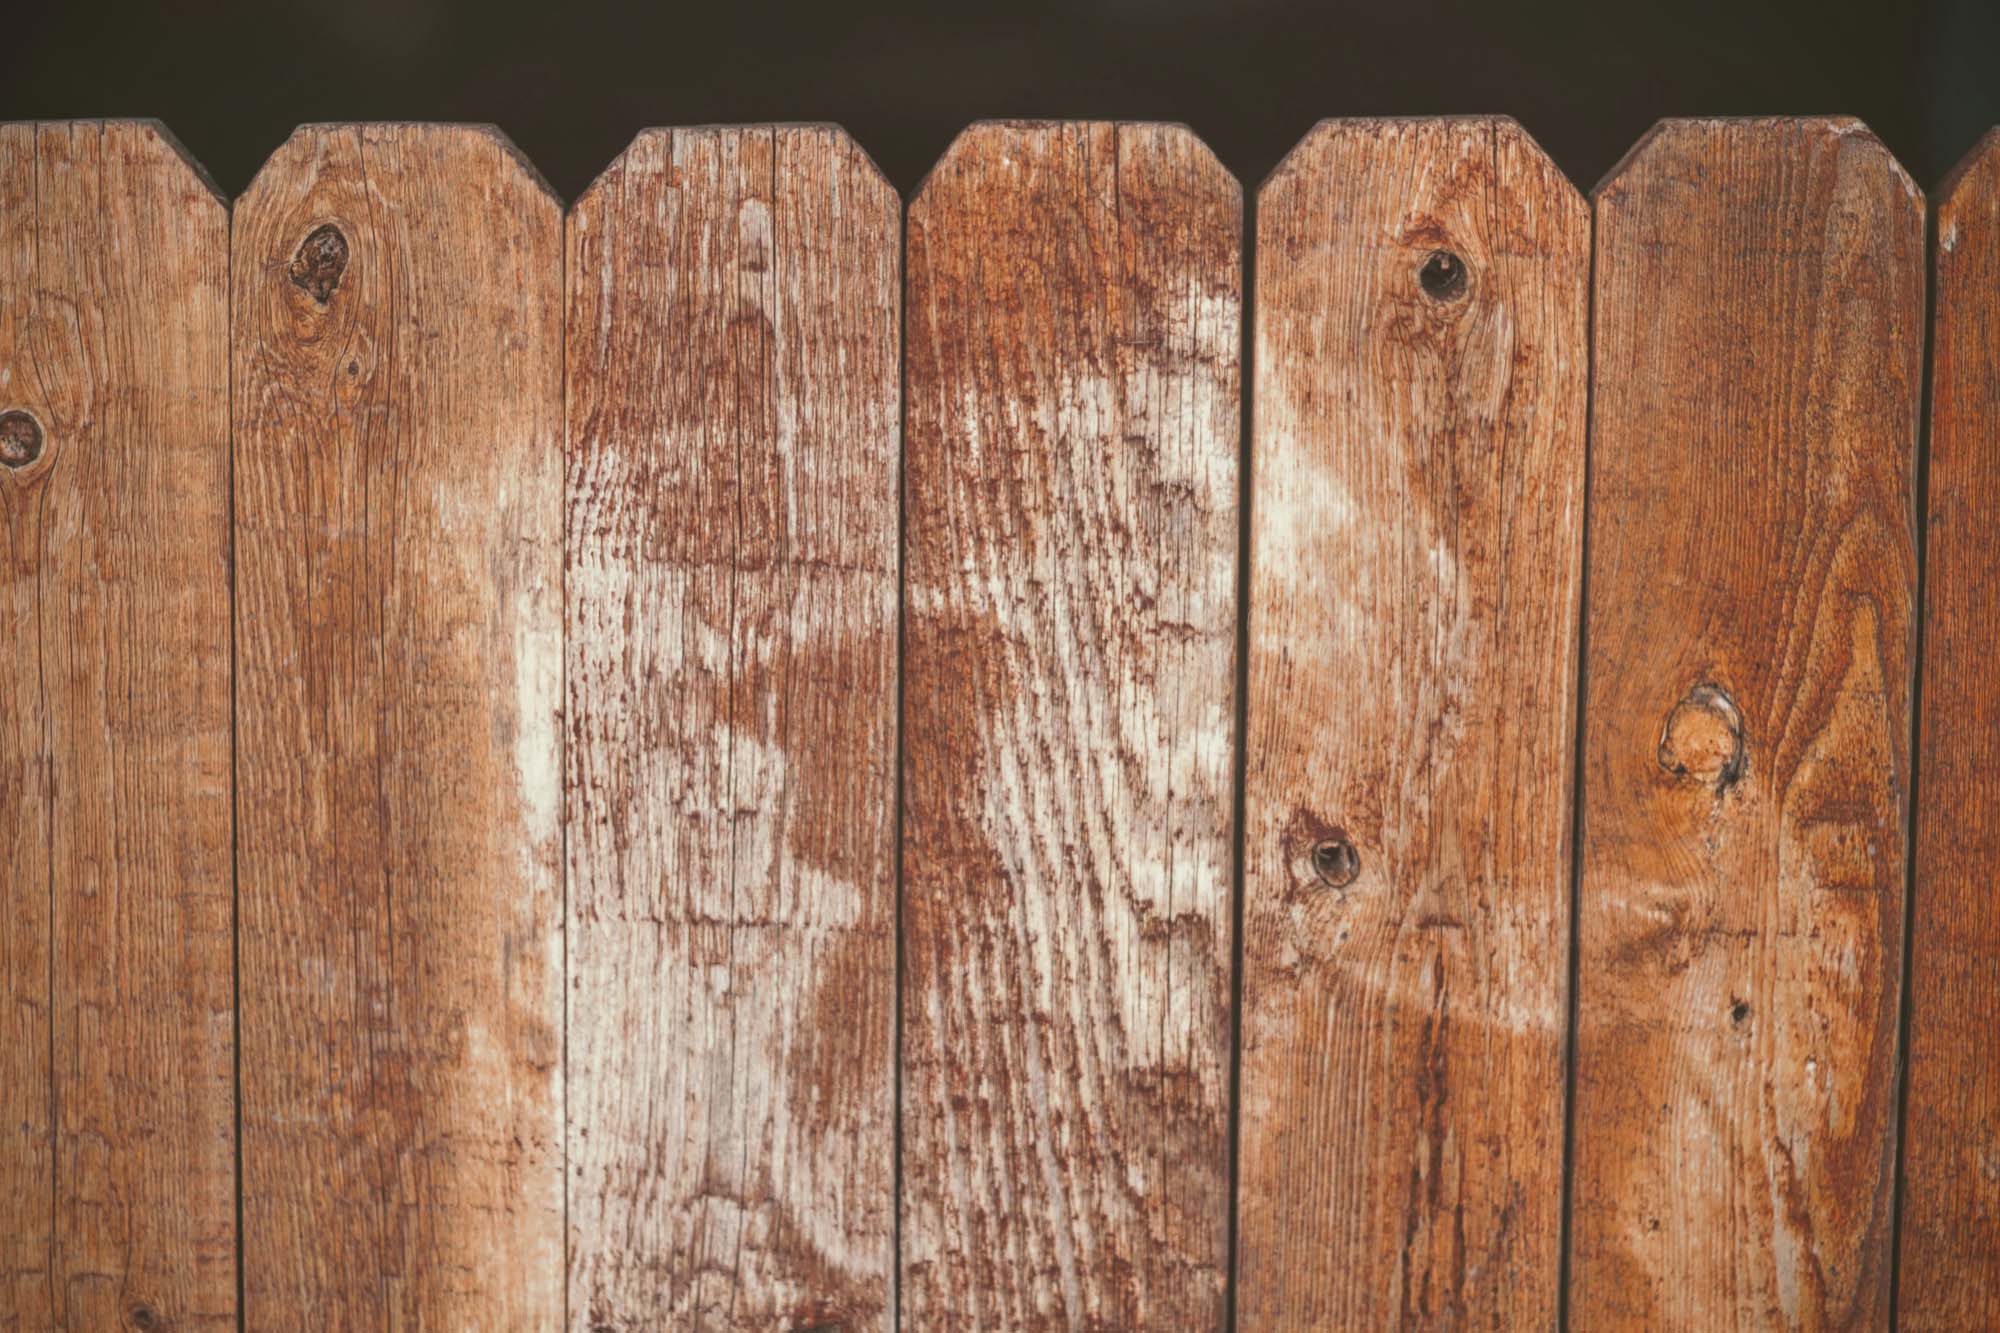 More Than a Typical Wood Fence